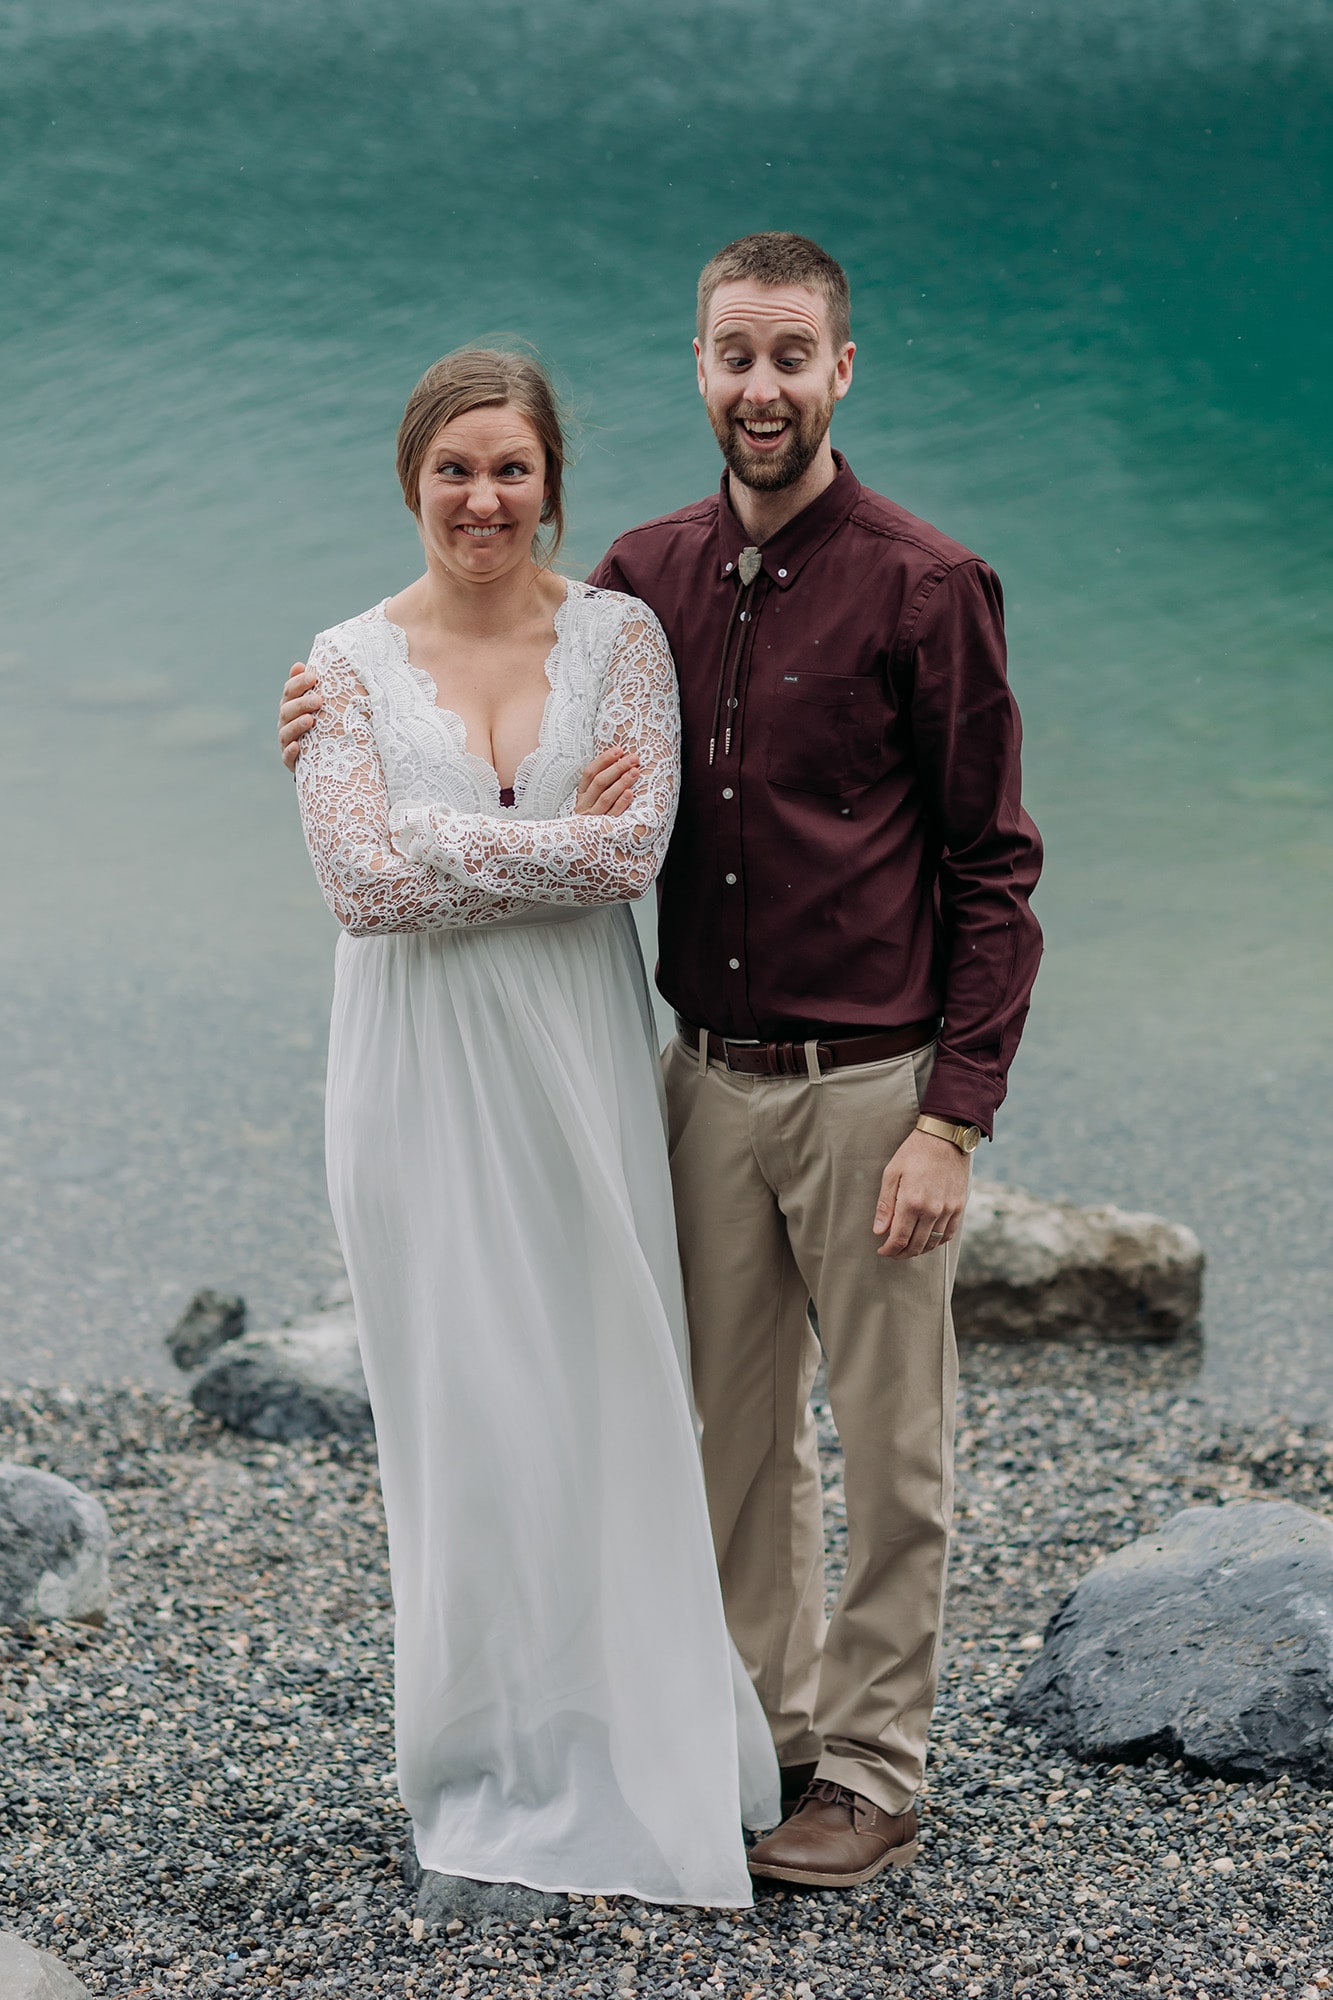 Canmore Elopement Planner photographer kananaskis bride groom photos silly